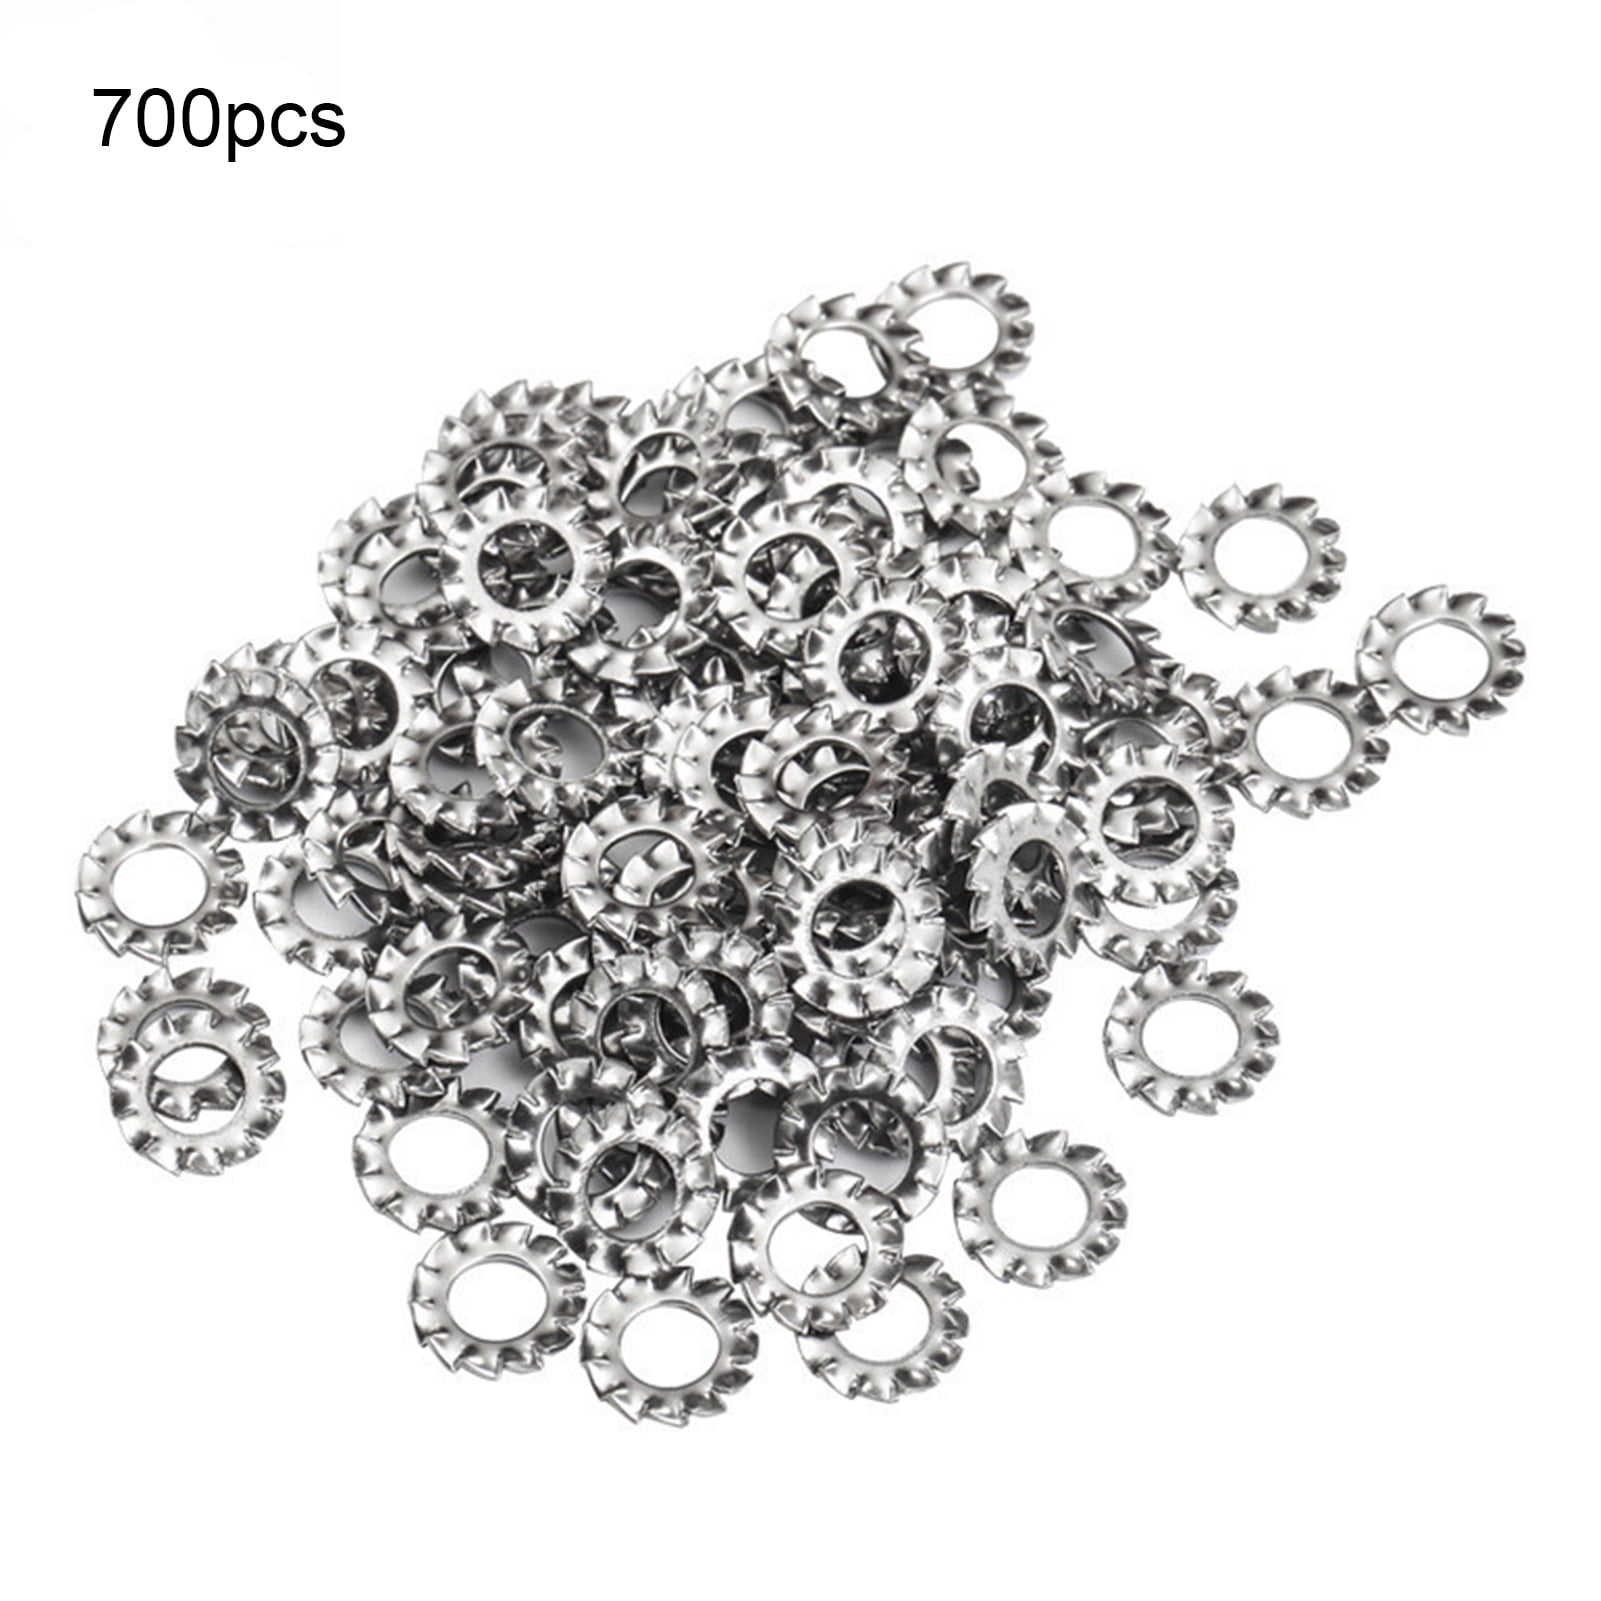 200 Pieces M5 Flat Lock Washer Shakeproof Washer 8.8 Grade Alloy Steel 